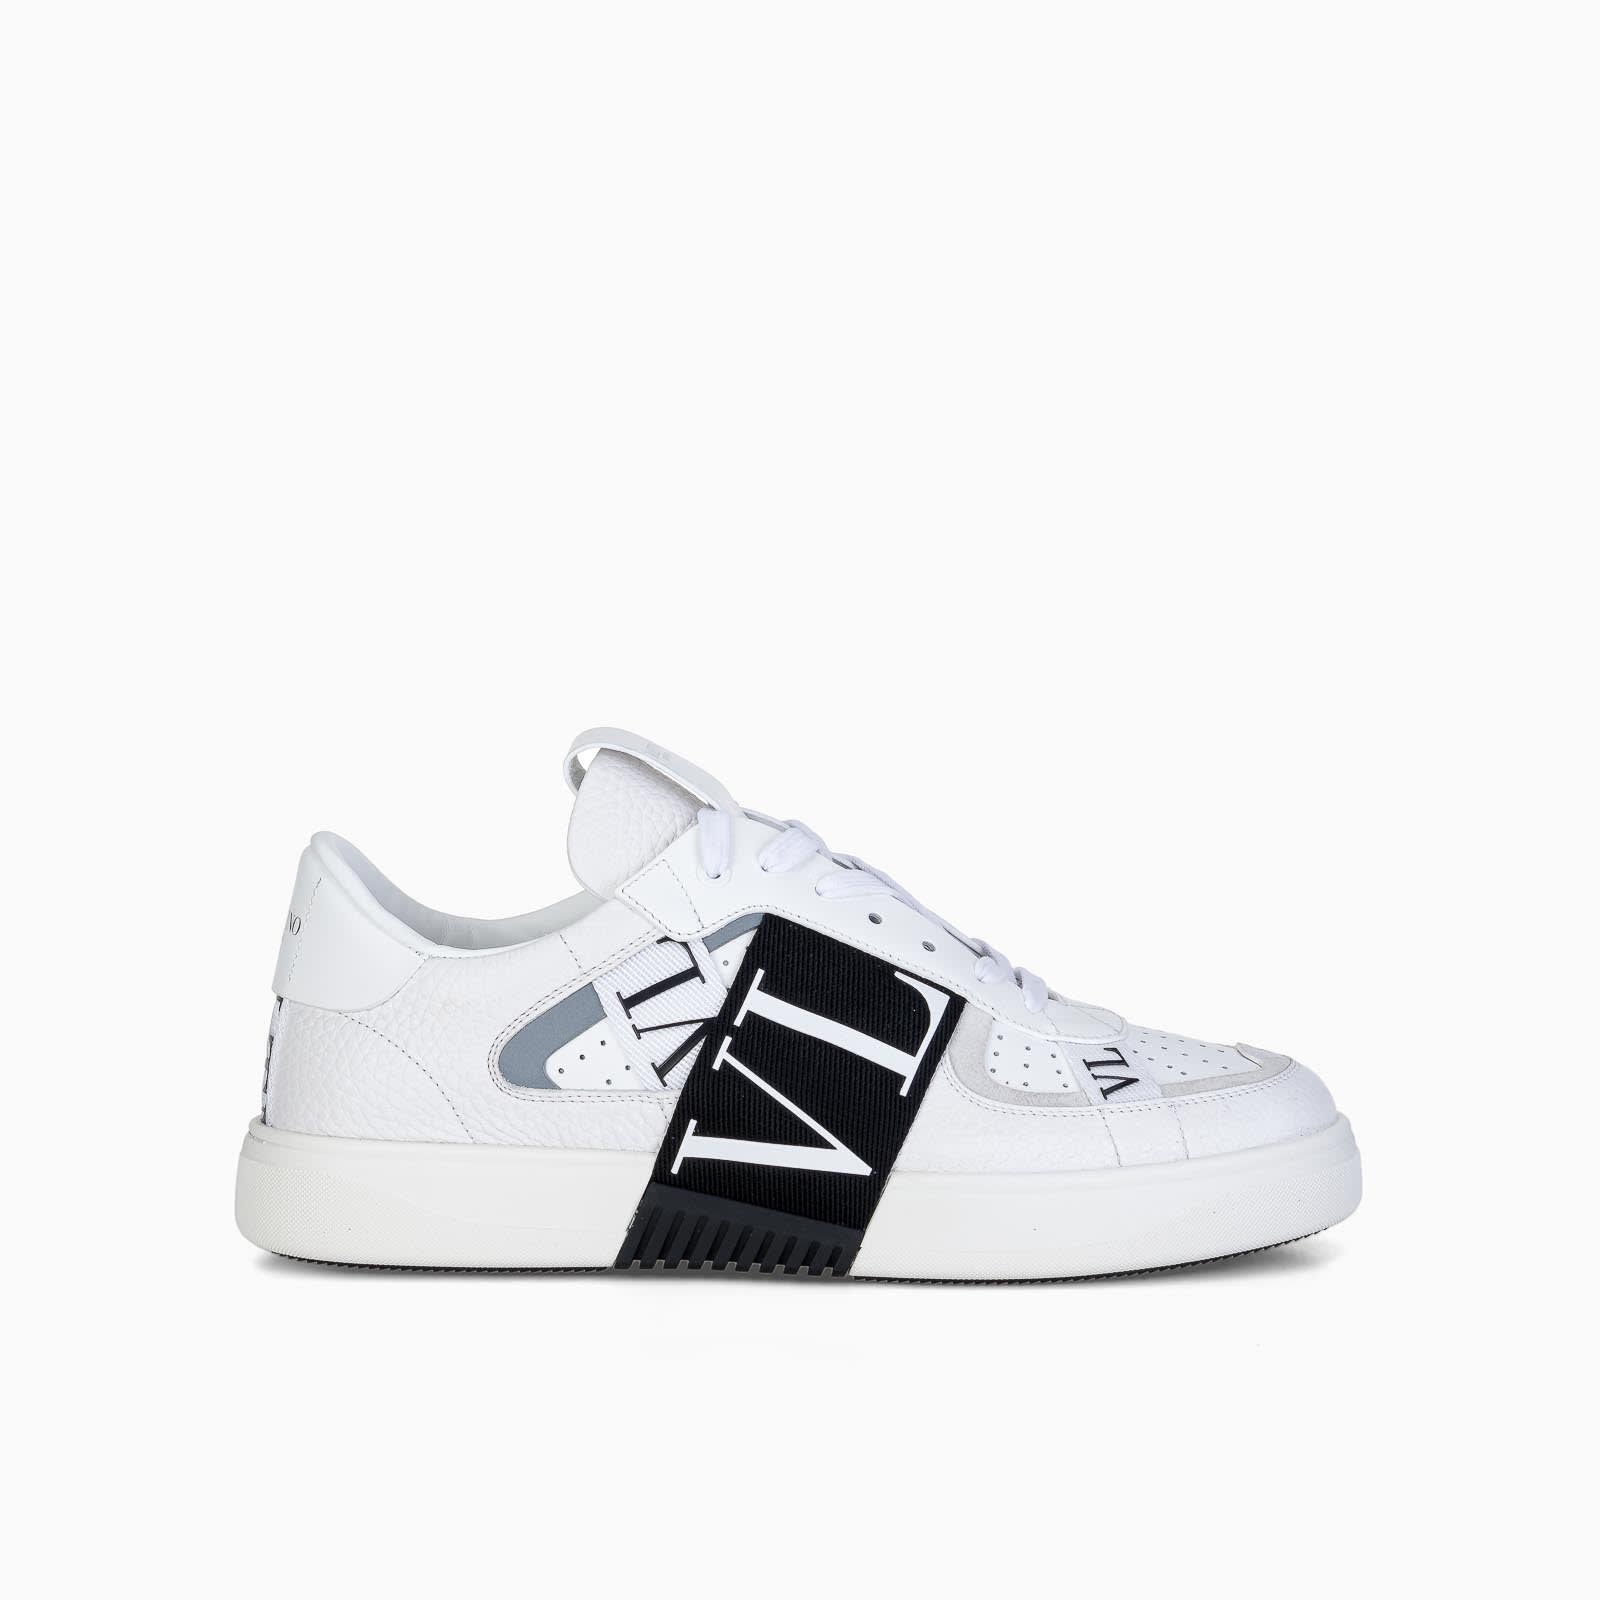 Valentino Low-top Calfskin Vl7n Sneaker With Bands